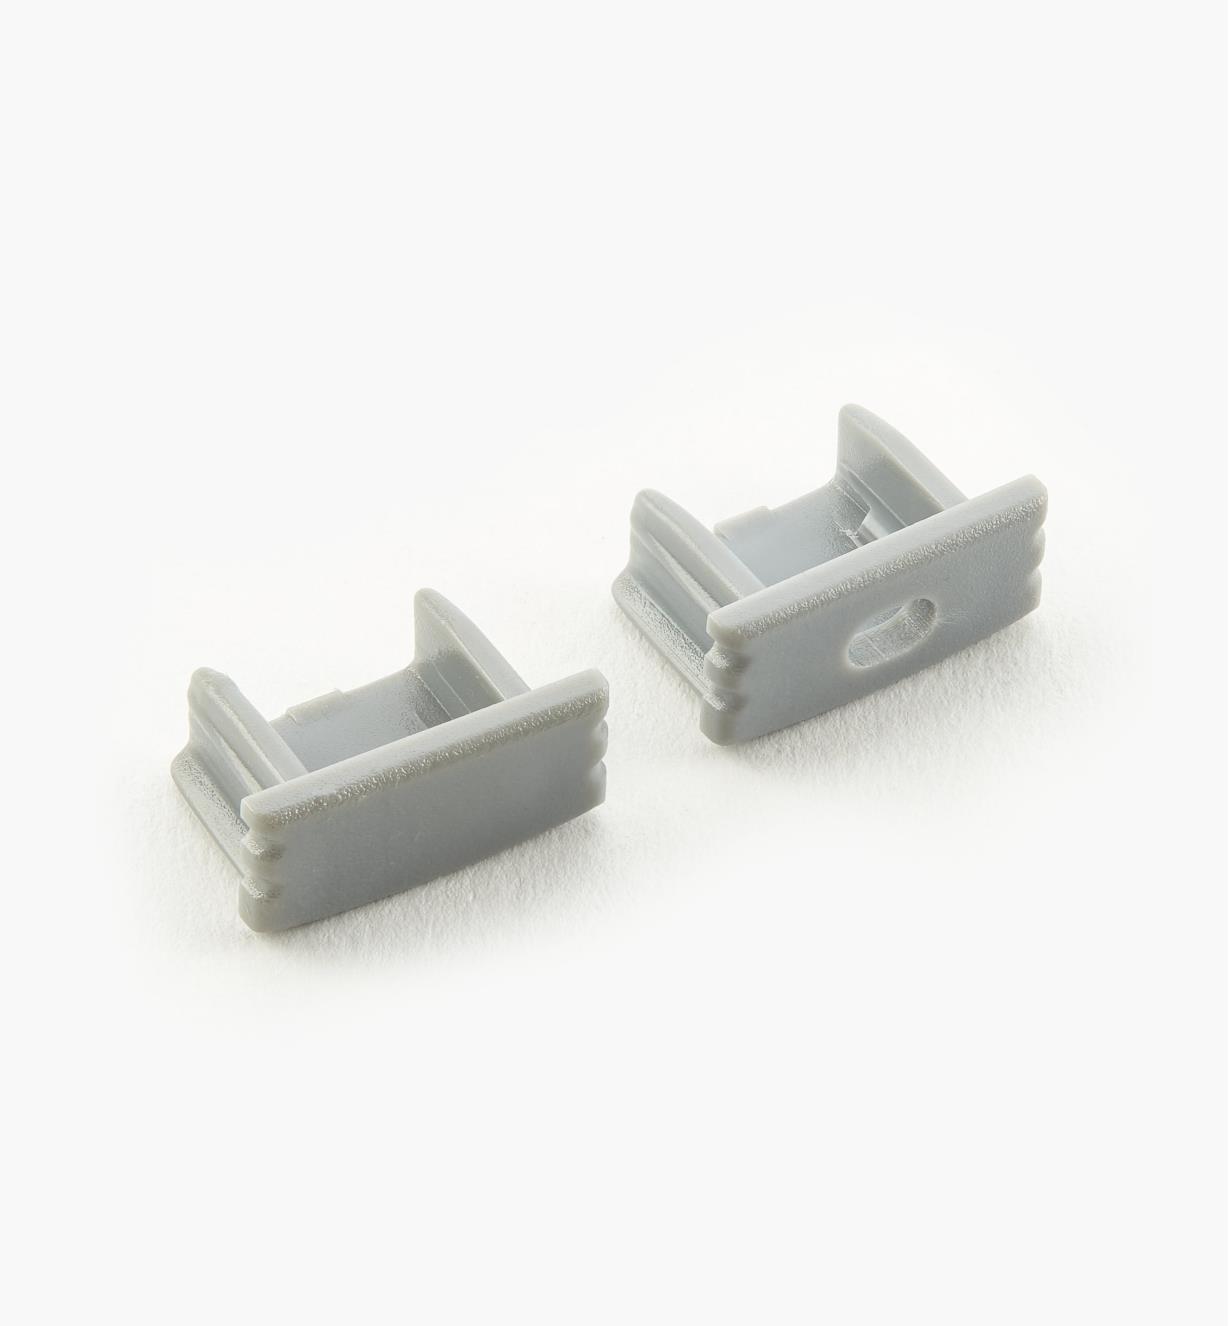 00U4245 - End Caps for Surface-Mount Channel, pair